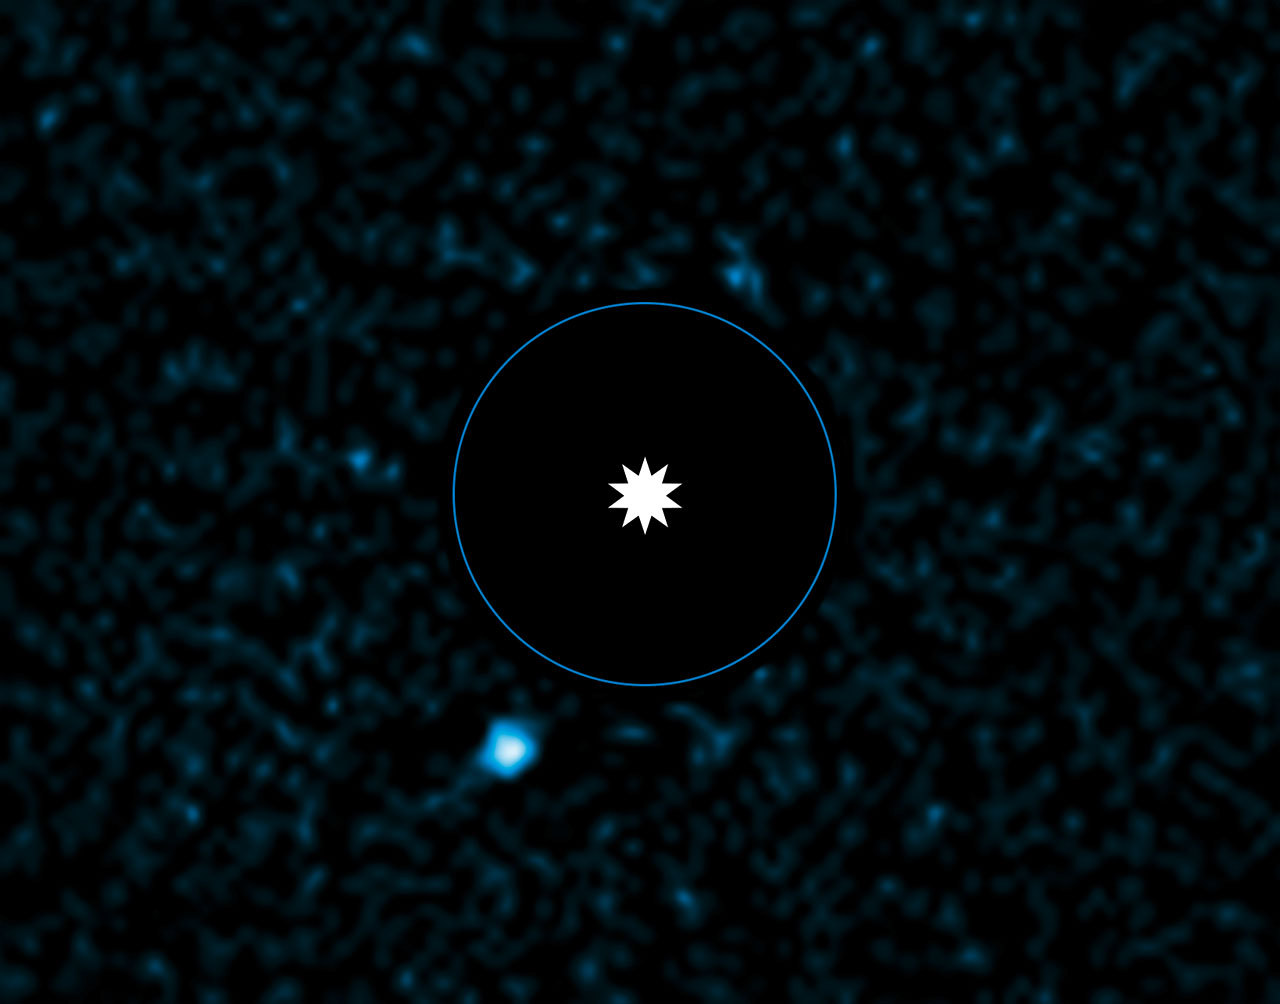 A team of astronomers using ESO’s Very Large Telescope has imaged a faint object moving near a bright star. With an estimated mass of four to five times that of Jupiter, it would be the least massive planet to be directly observed outside the Solar System. The discovery is an important contribution to our understanding of the formation and evolution of planetary systems. Image credit: ESO/J. Rameau